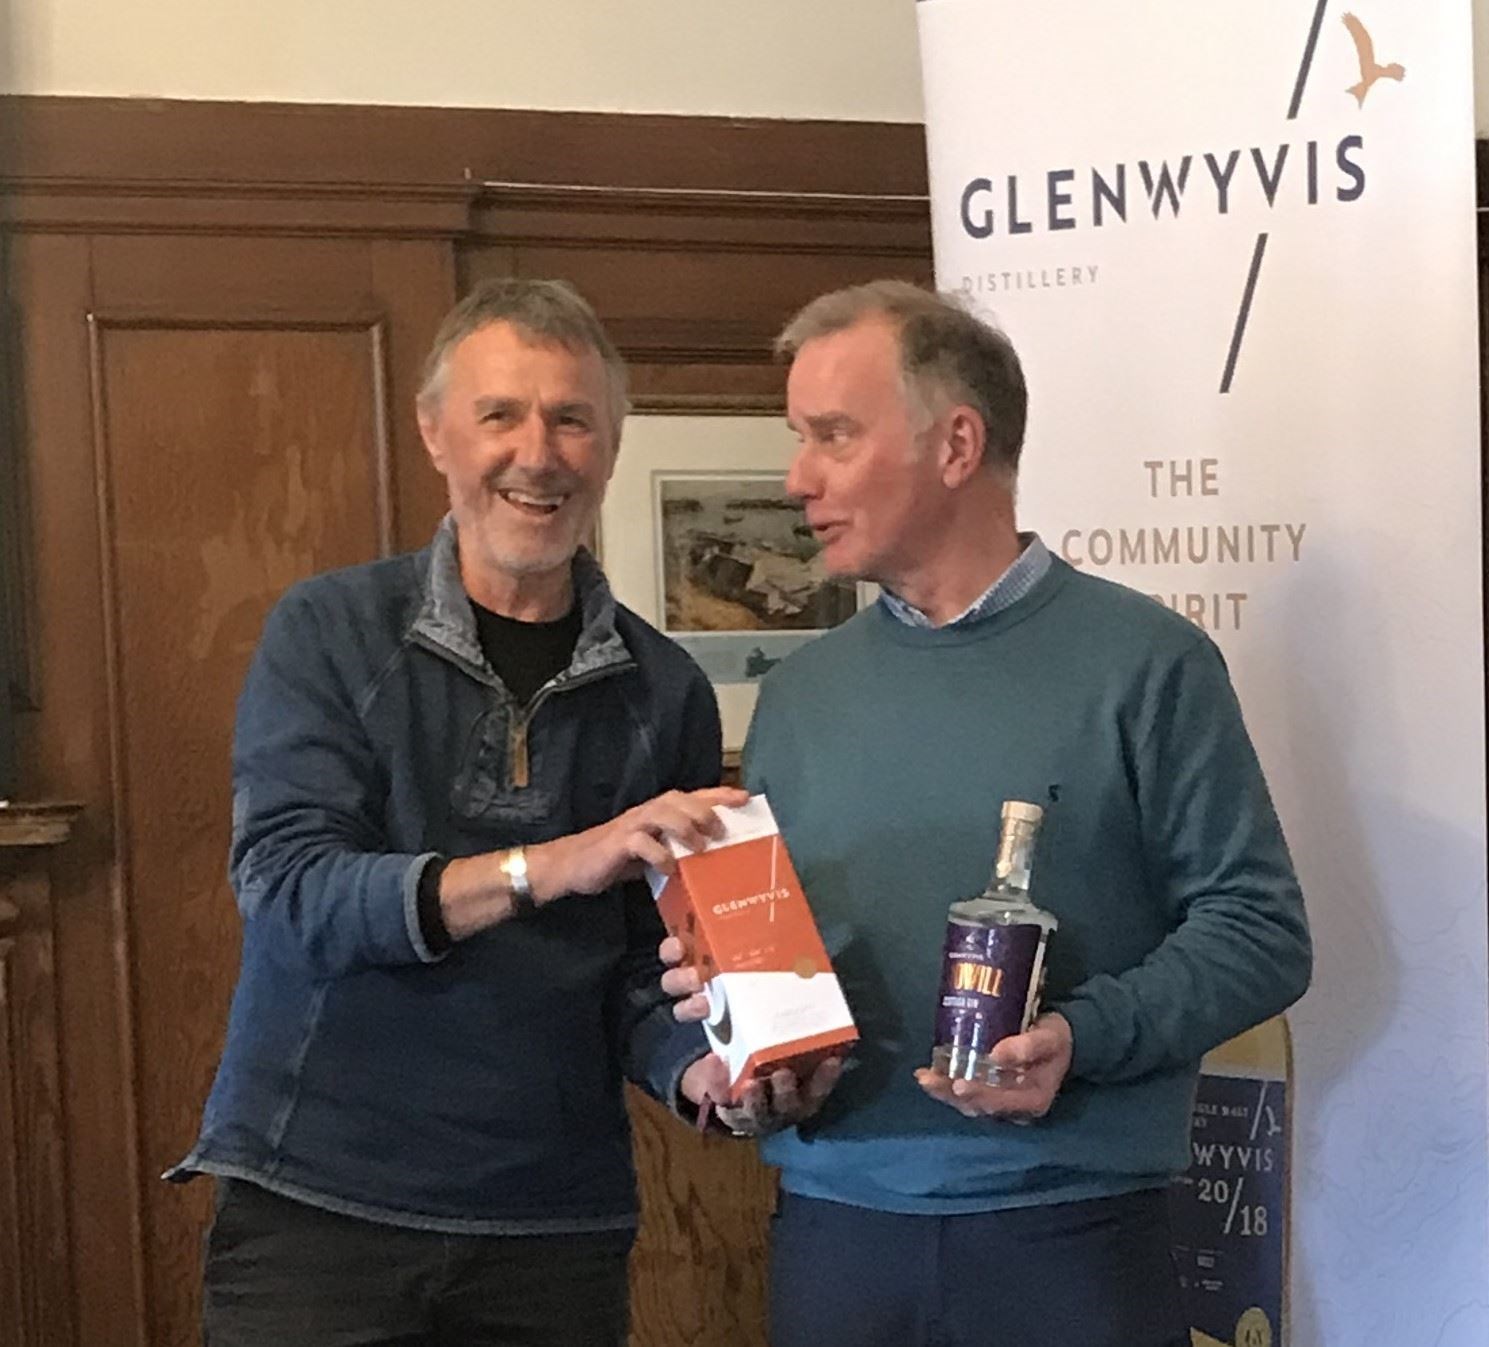 Strathpeffer Community Development Trust Eagle Stone Refurb, Ron McAulay and Graham Reid, who received a grant from the GlenWyvis Distillery good will fund.